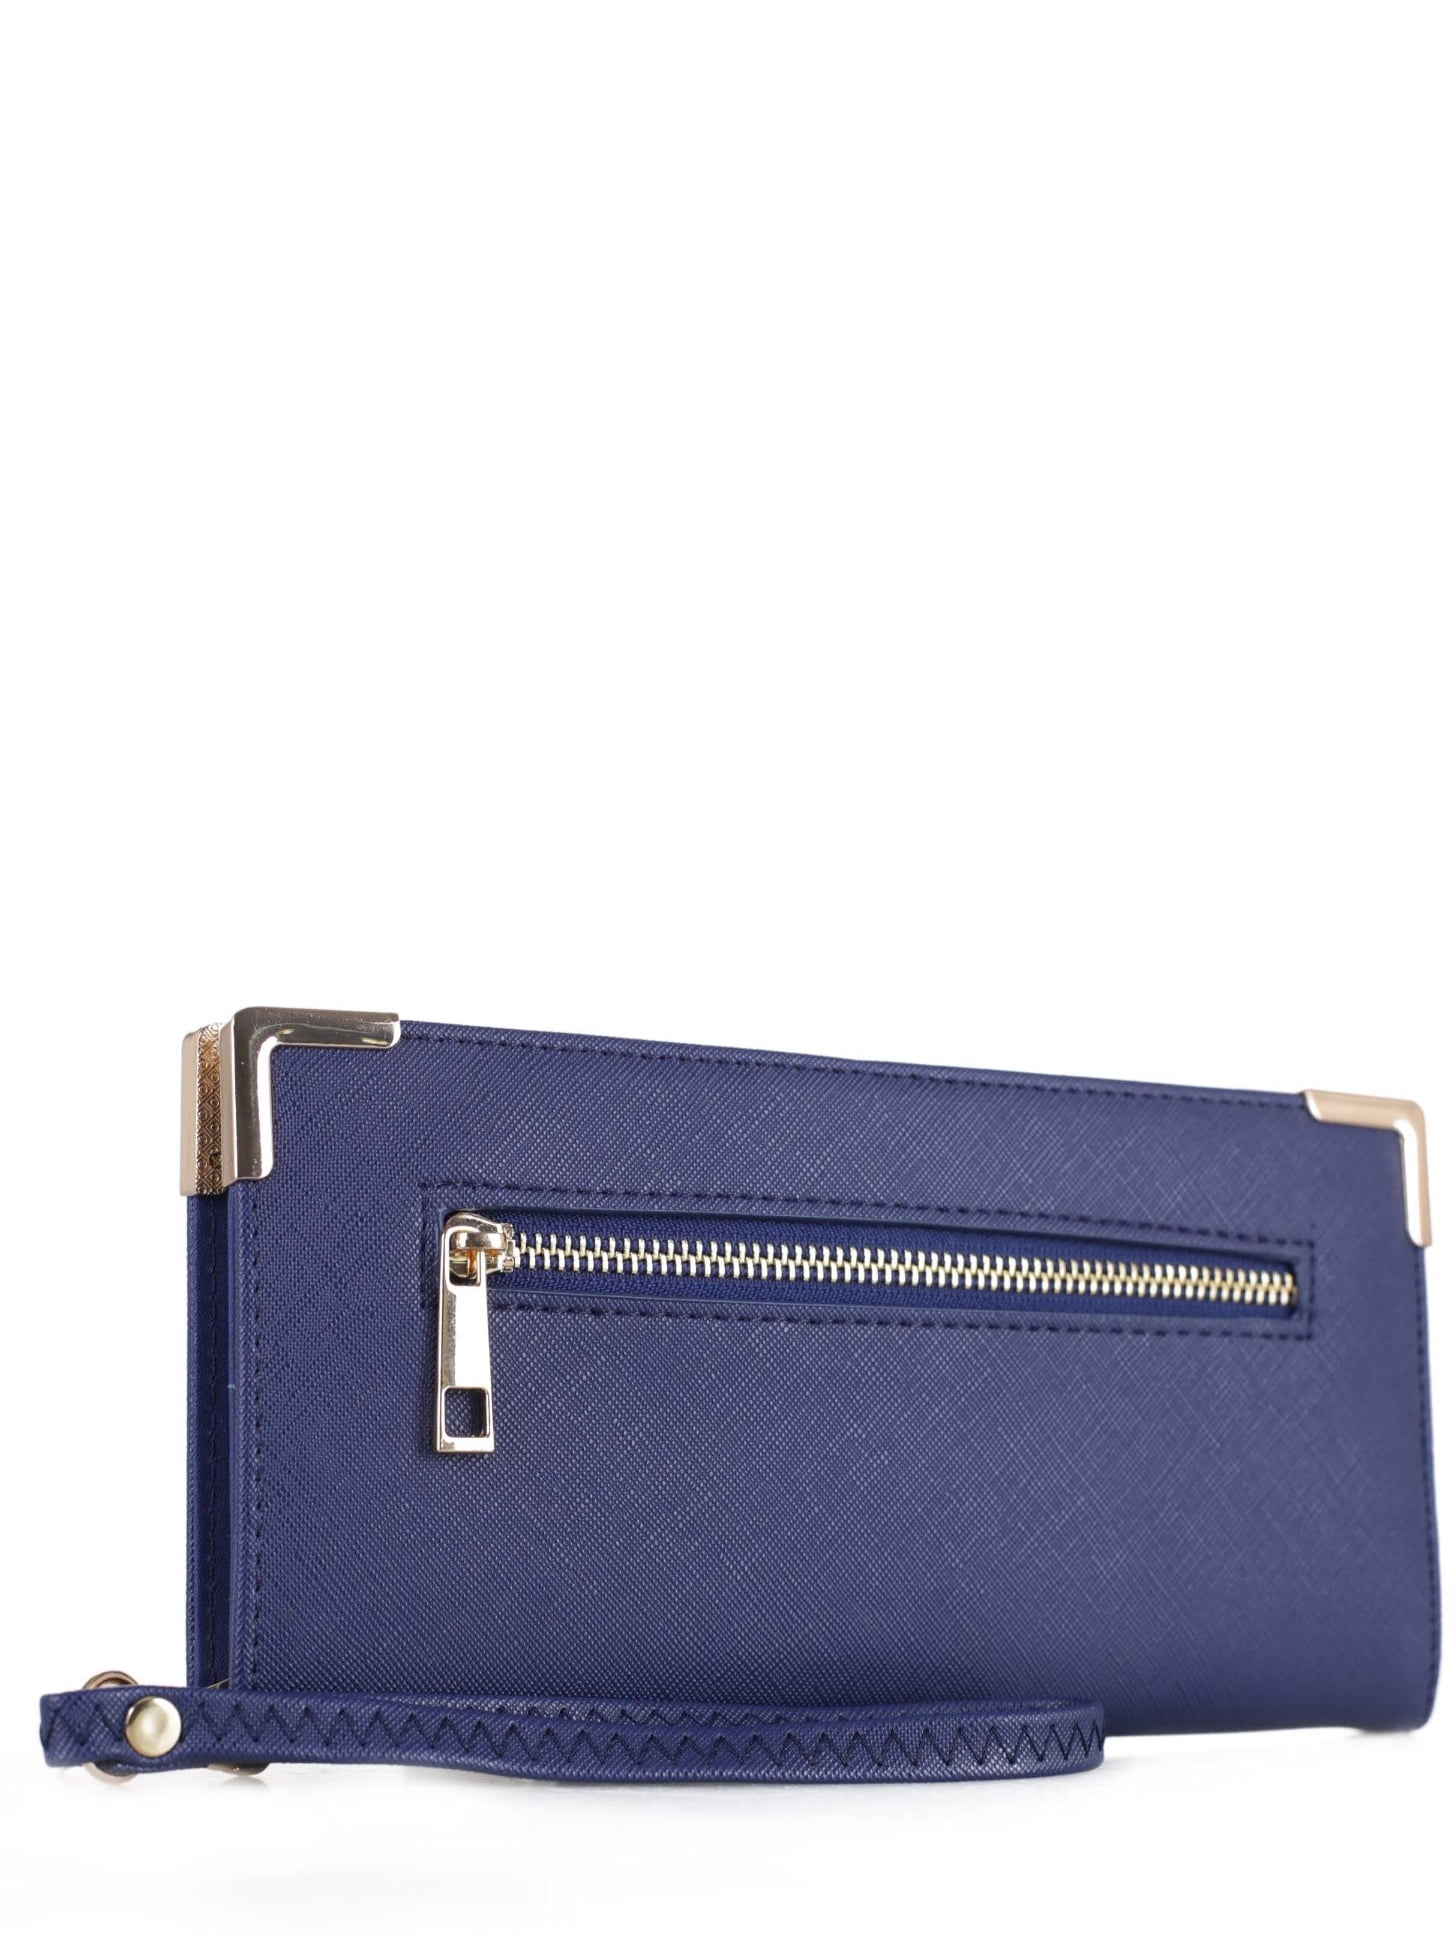 Deluxity - Deluxity Woman's Wristlet Wallet with Gold Hardware/Back ...